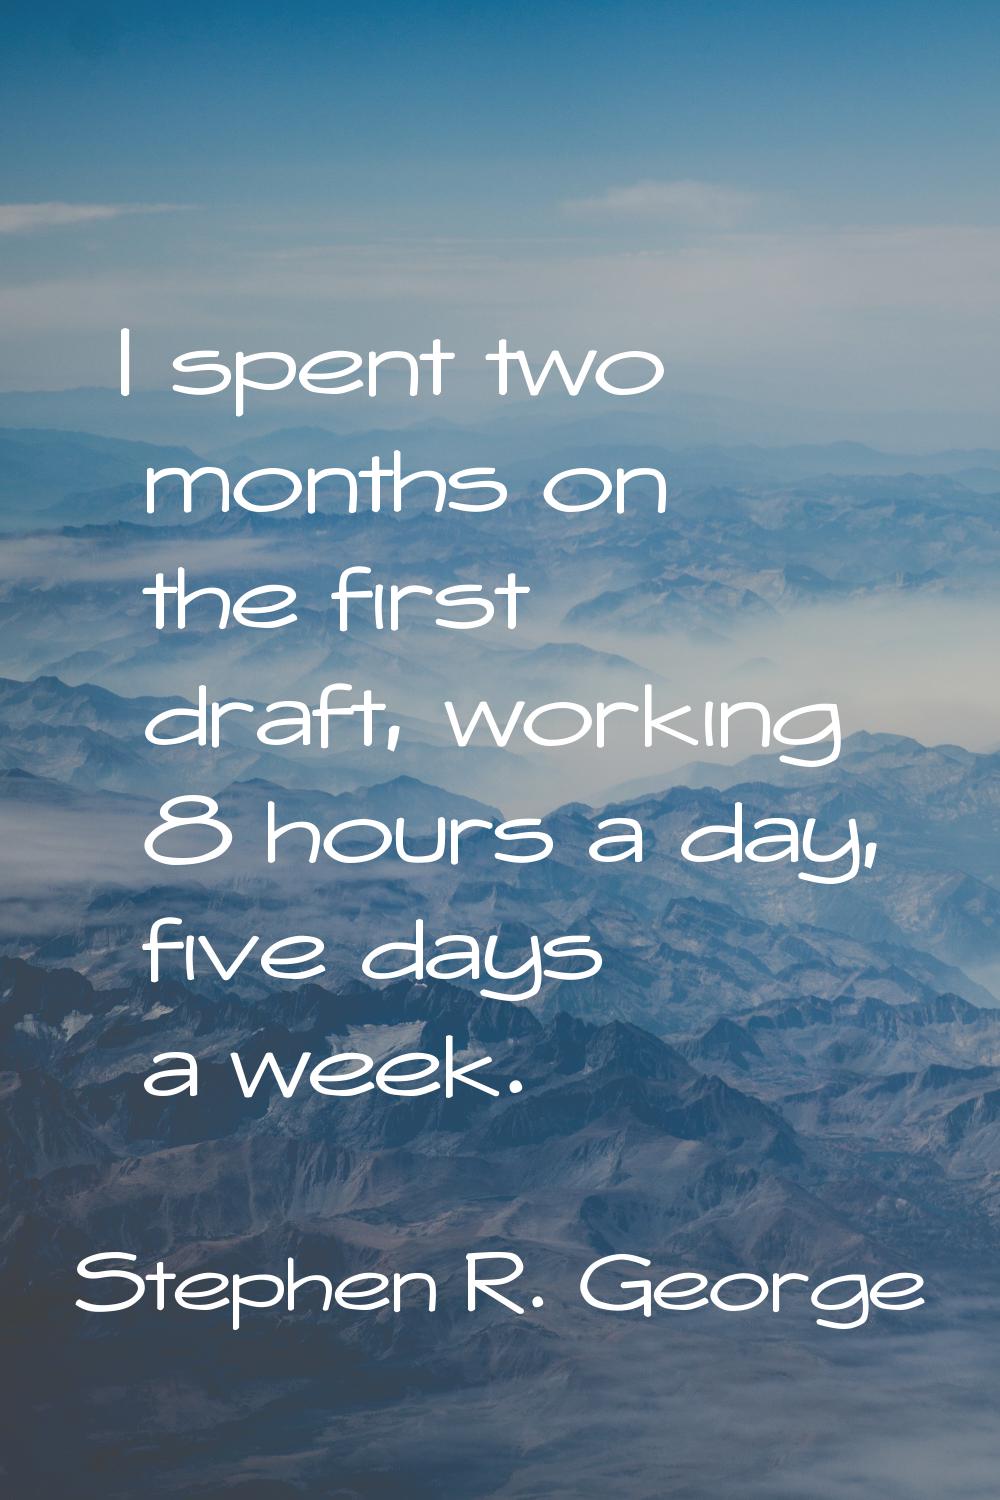 I spent two months on the first draft, working 8 hours a day, five days a week.